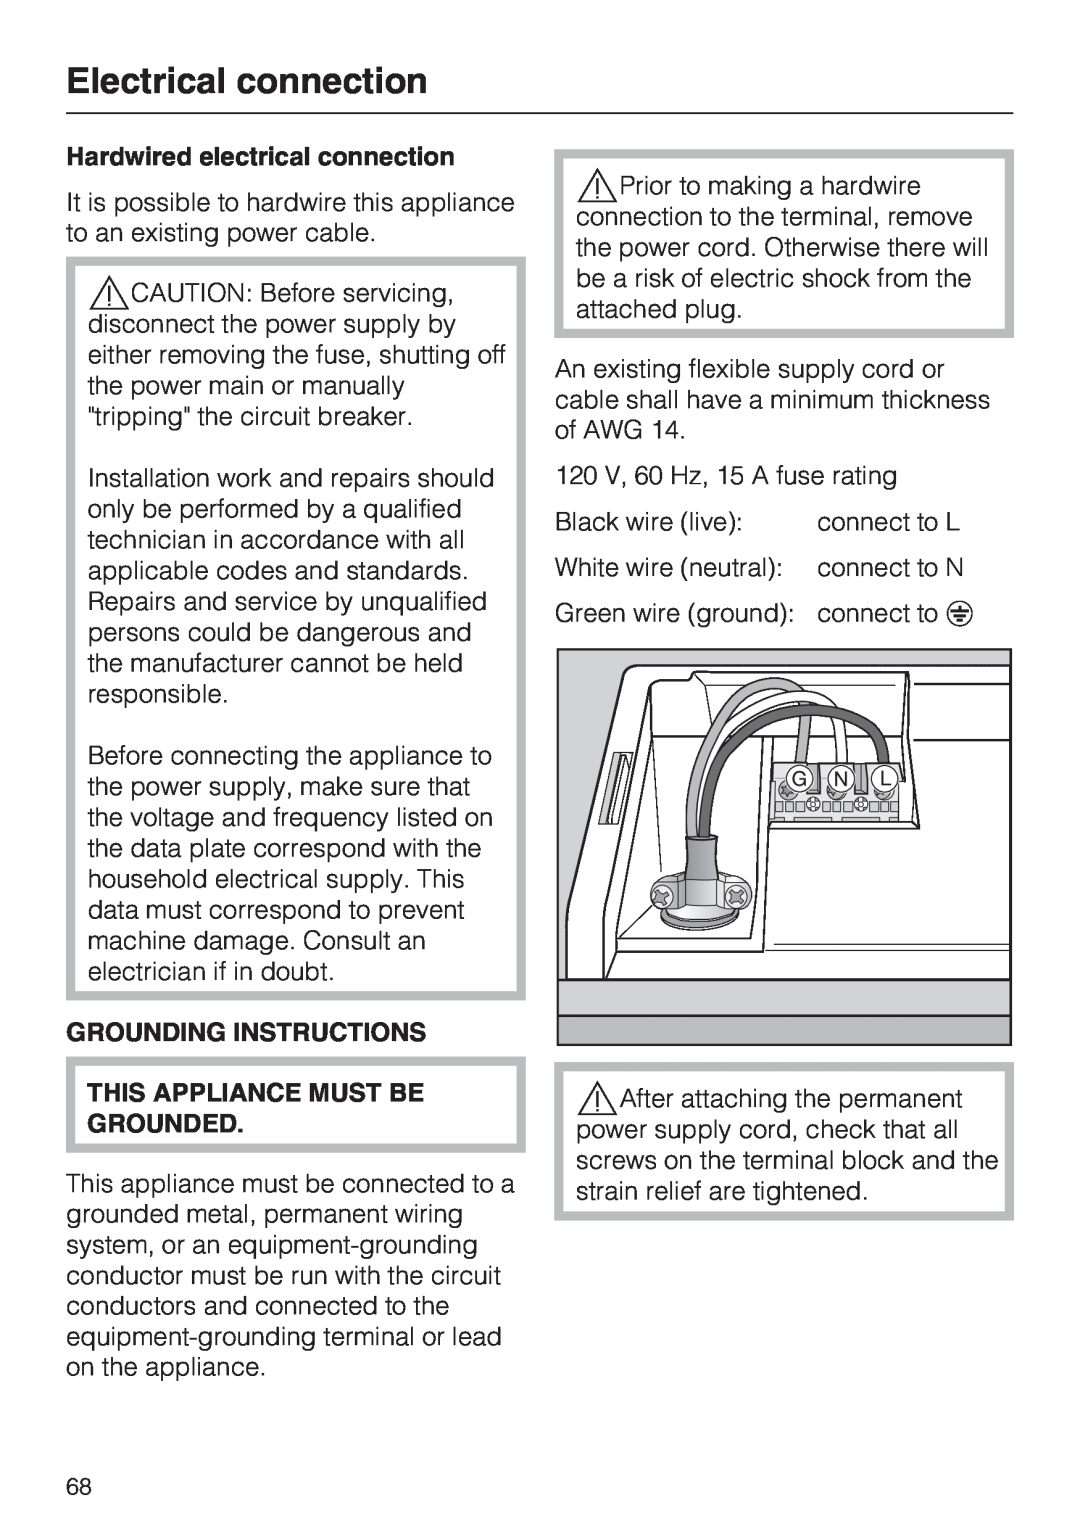 Miele G 5810, G 5815 manual Electrical connection, Hardwired electrical connection, Grounding Instructions 